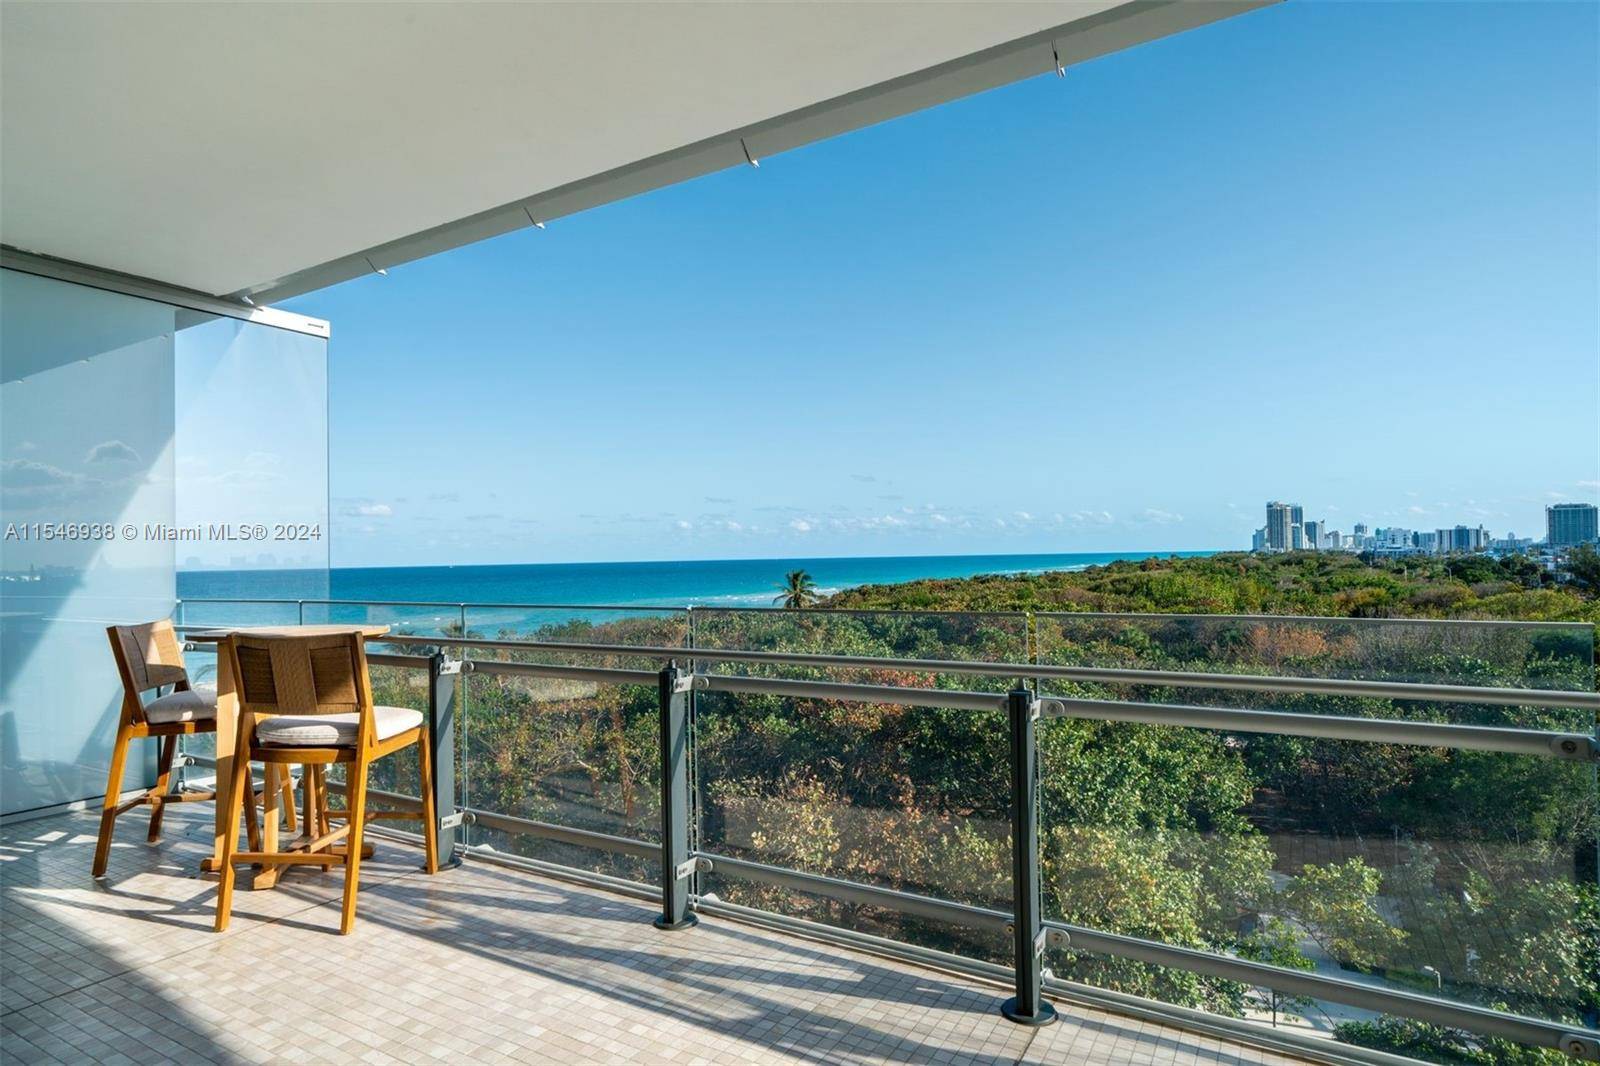 Experience Park and Ocean views at Eighty Seven Park by Renzo Piano.